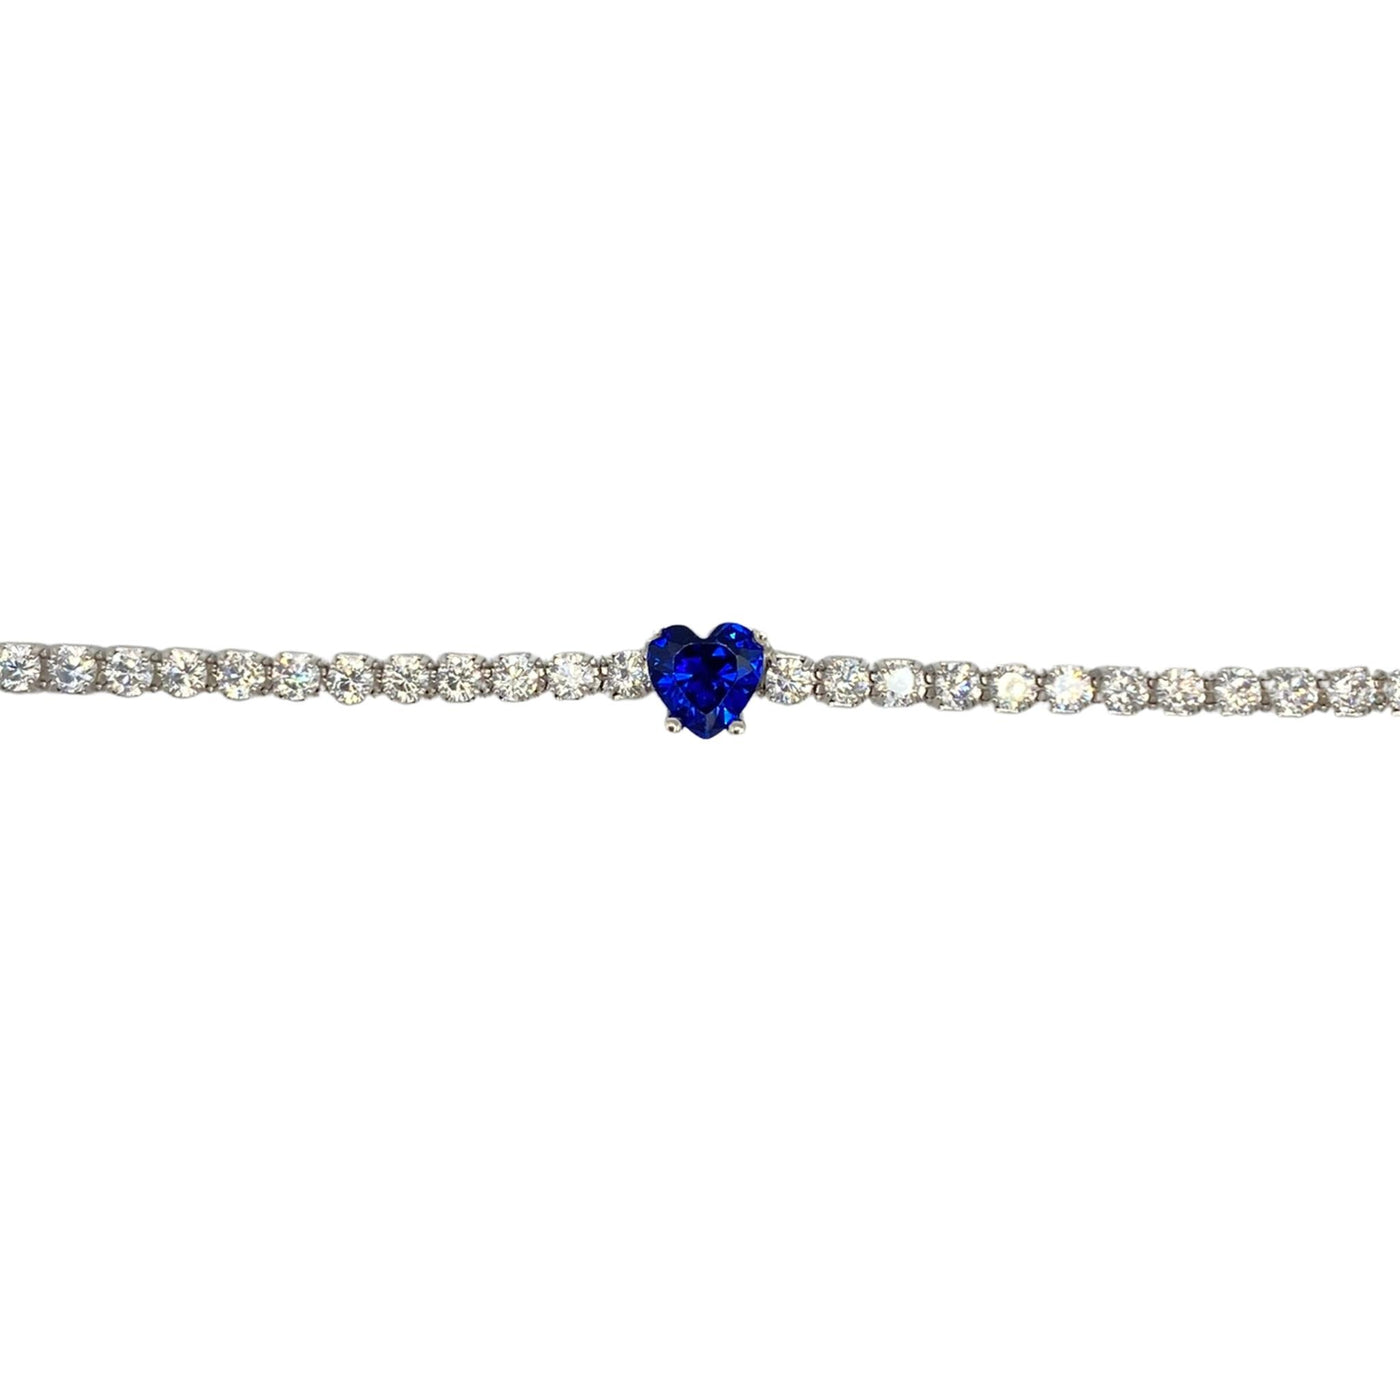 Silver tennis anklet with heart